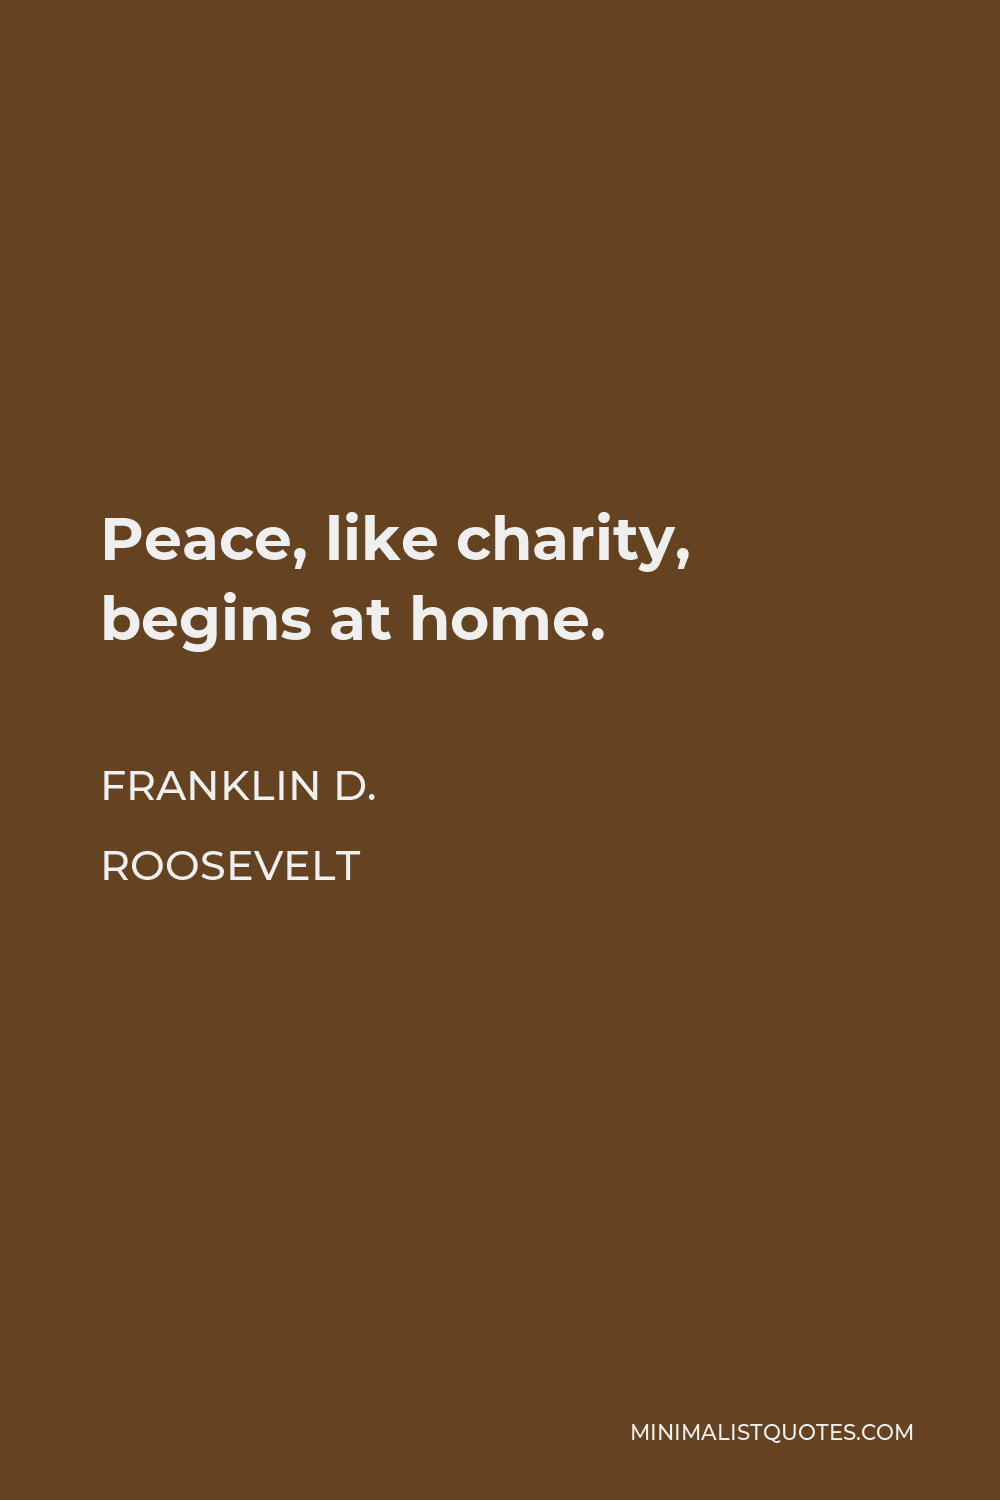 Franklin D. Roosevelt Quote - Peace, like charity, begins at home.